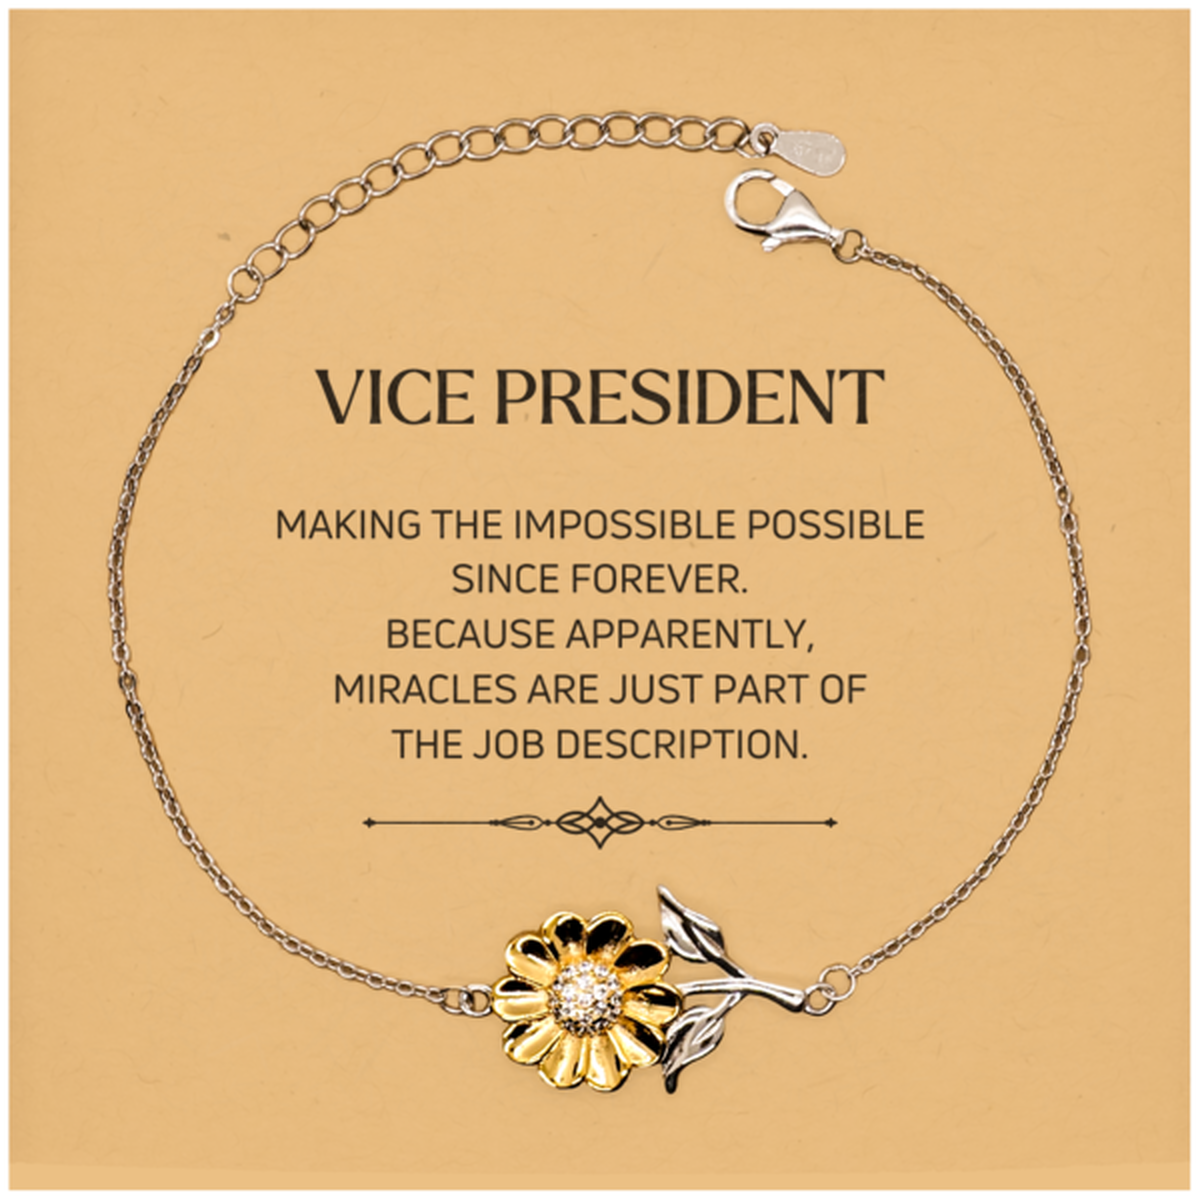 Funny Vice President Gifts, Miracles are just part of the job description, Inspirational Birthday Christmas Sunflower Bracelet For Vice President, Men, Women, Coworkers, Friends, Boss